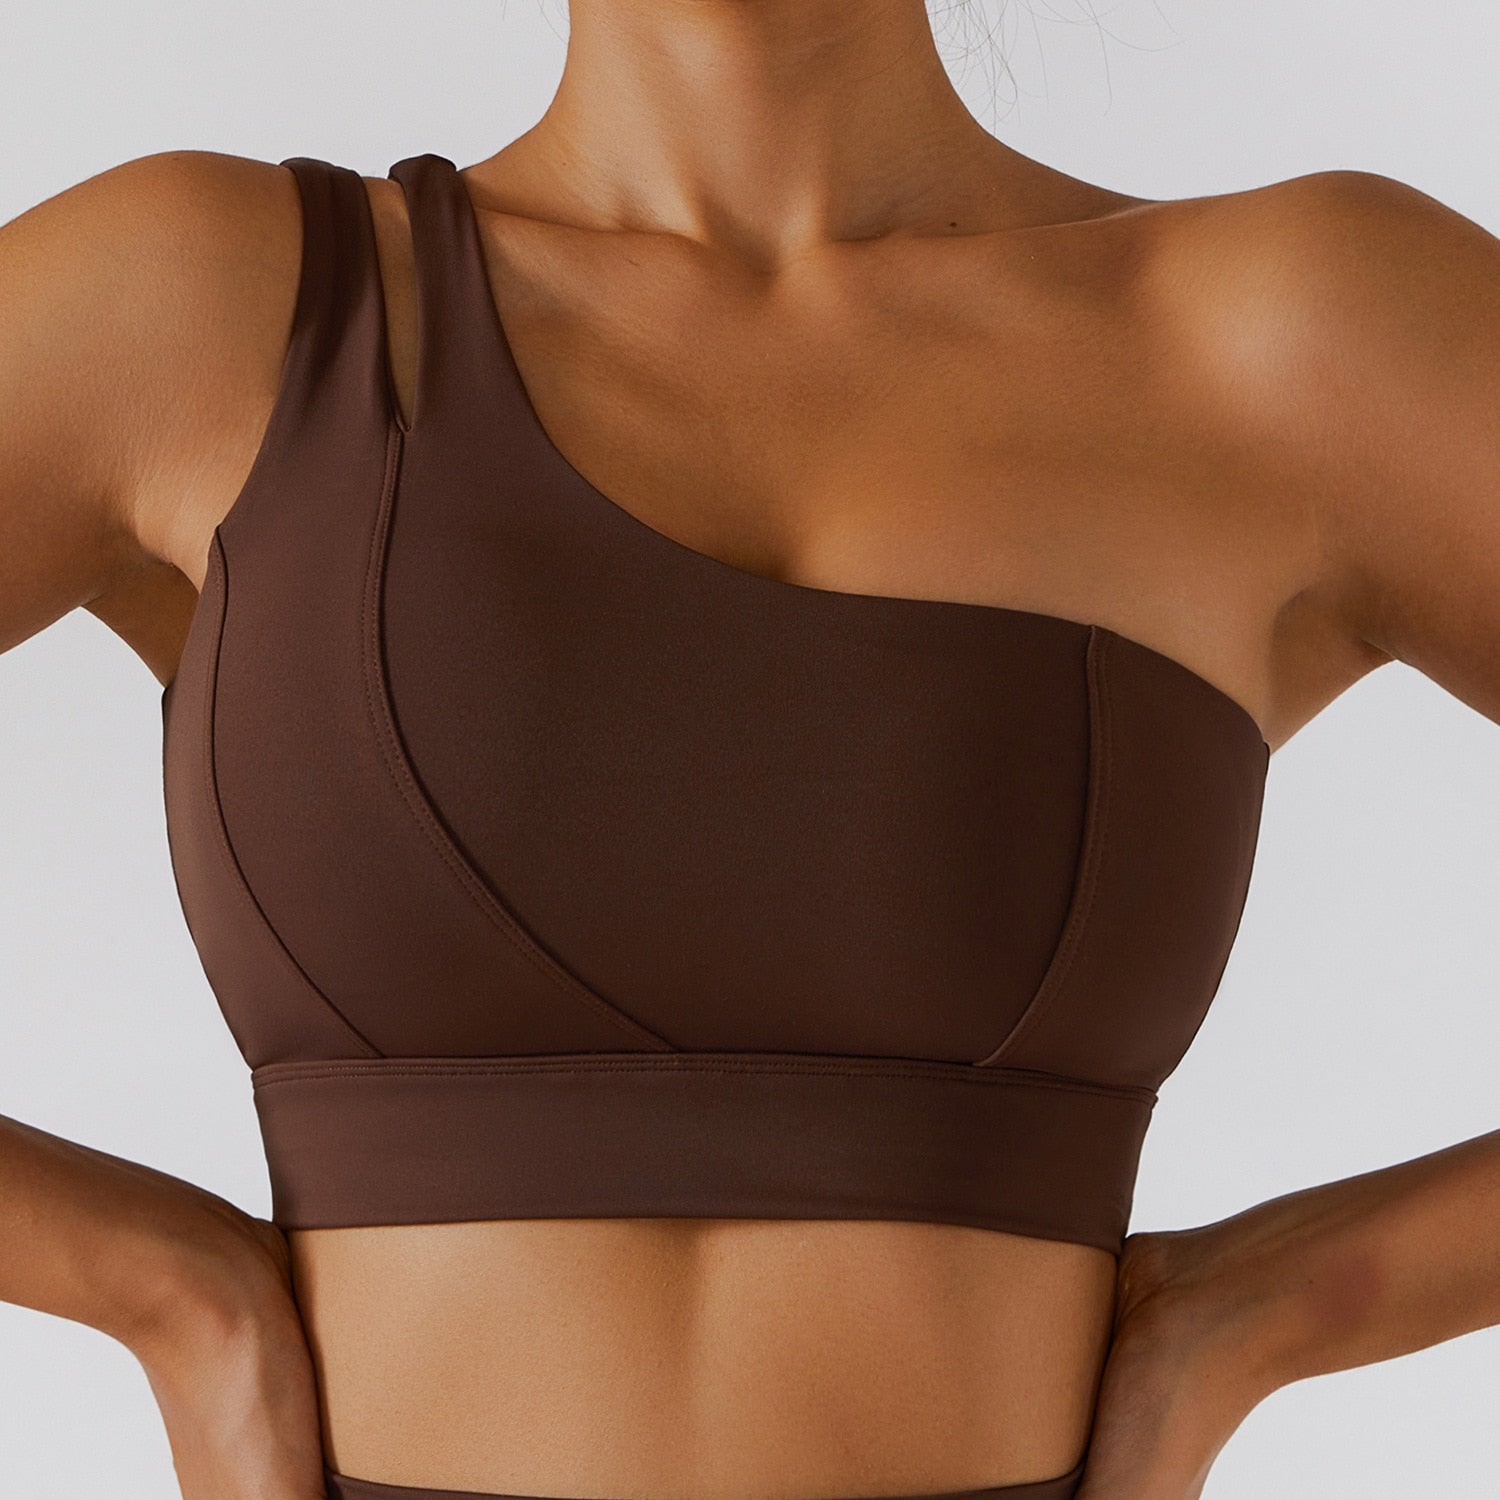 Brown Top For women's Fitness